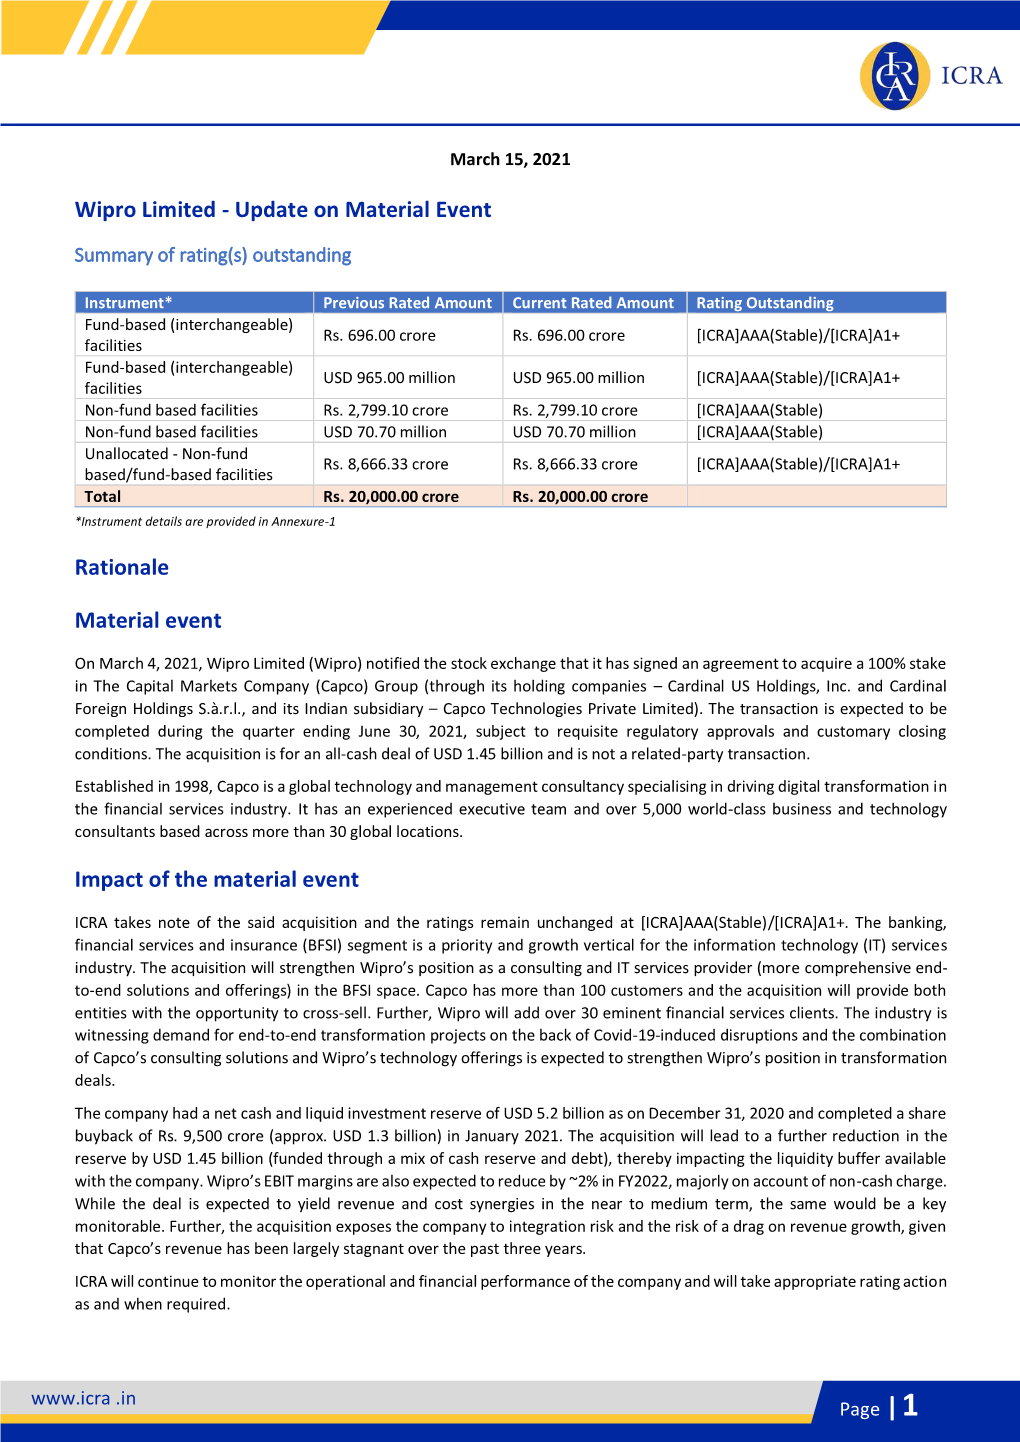 Wipro Limited - Update on Material Event